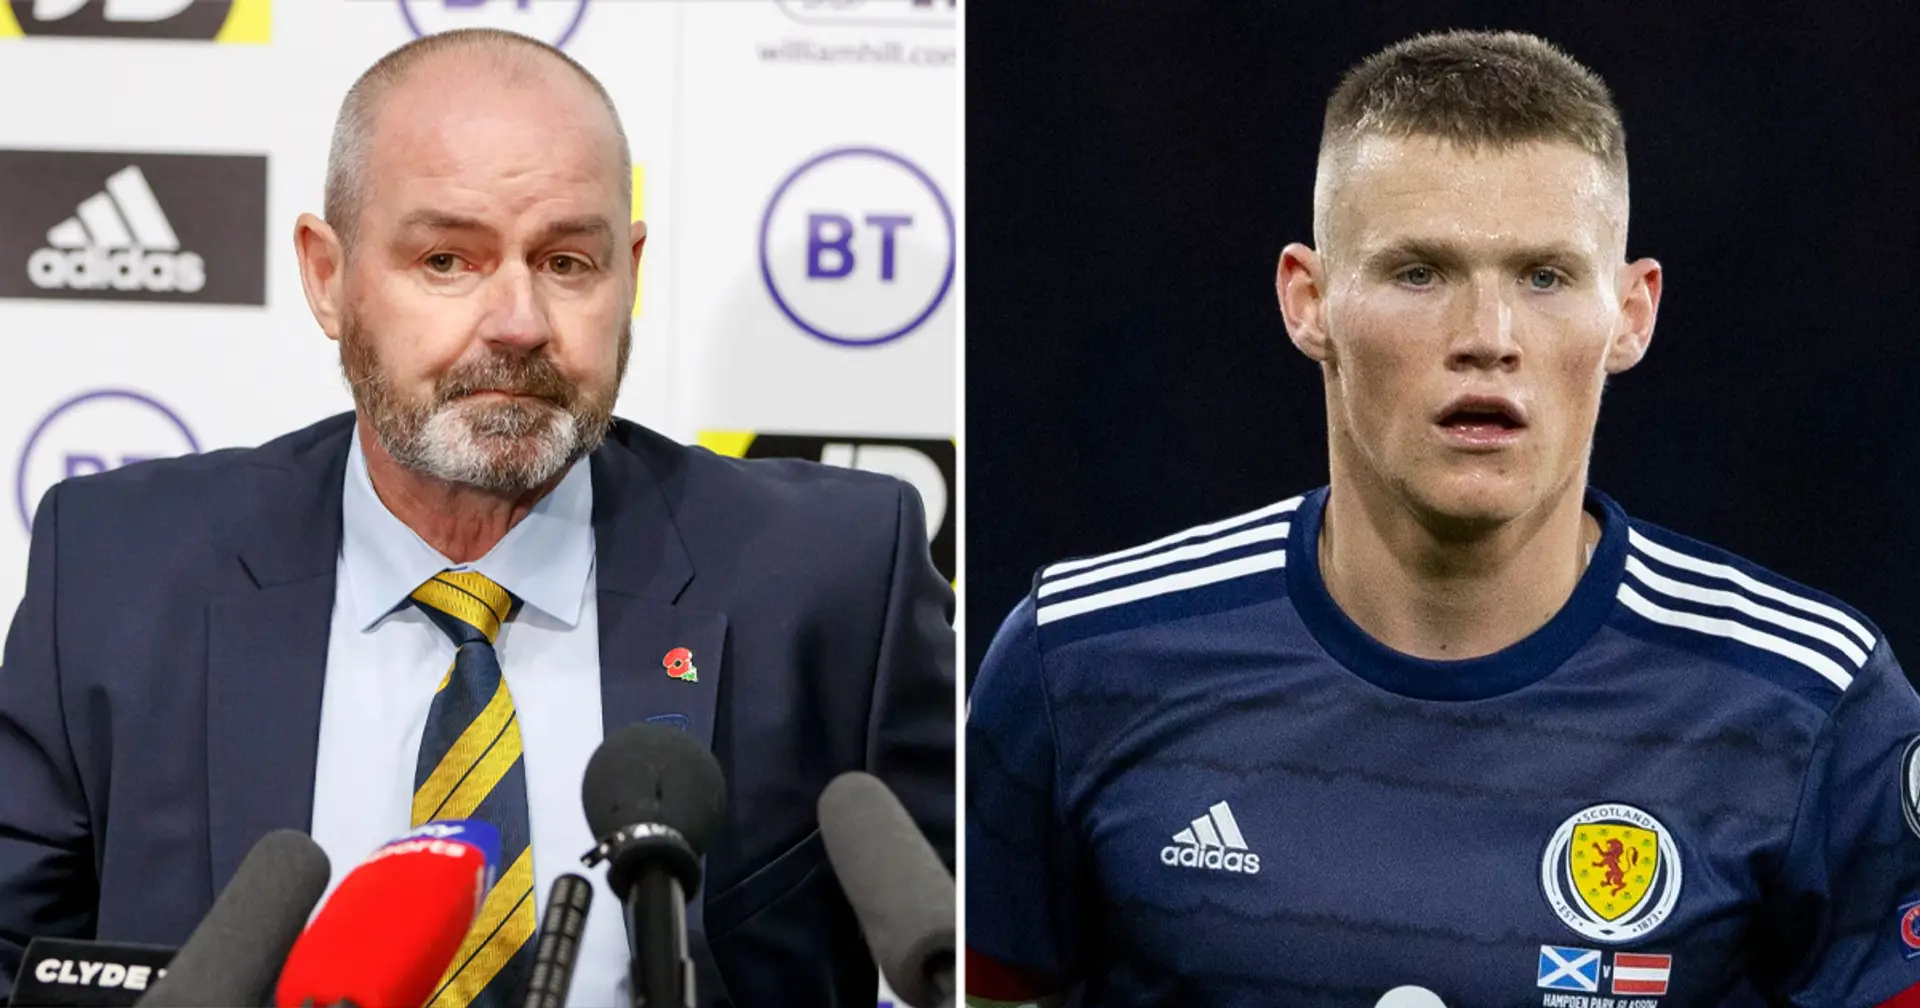 Scotland head coach provides concerning fitness update on McTominay